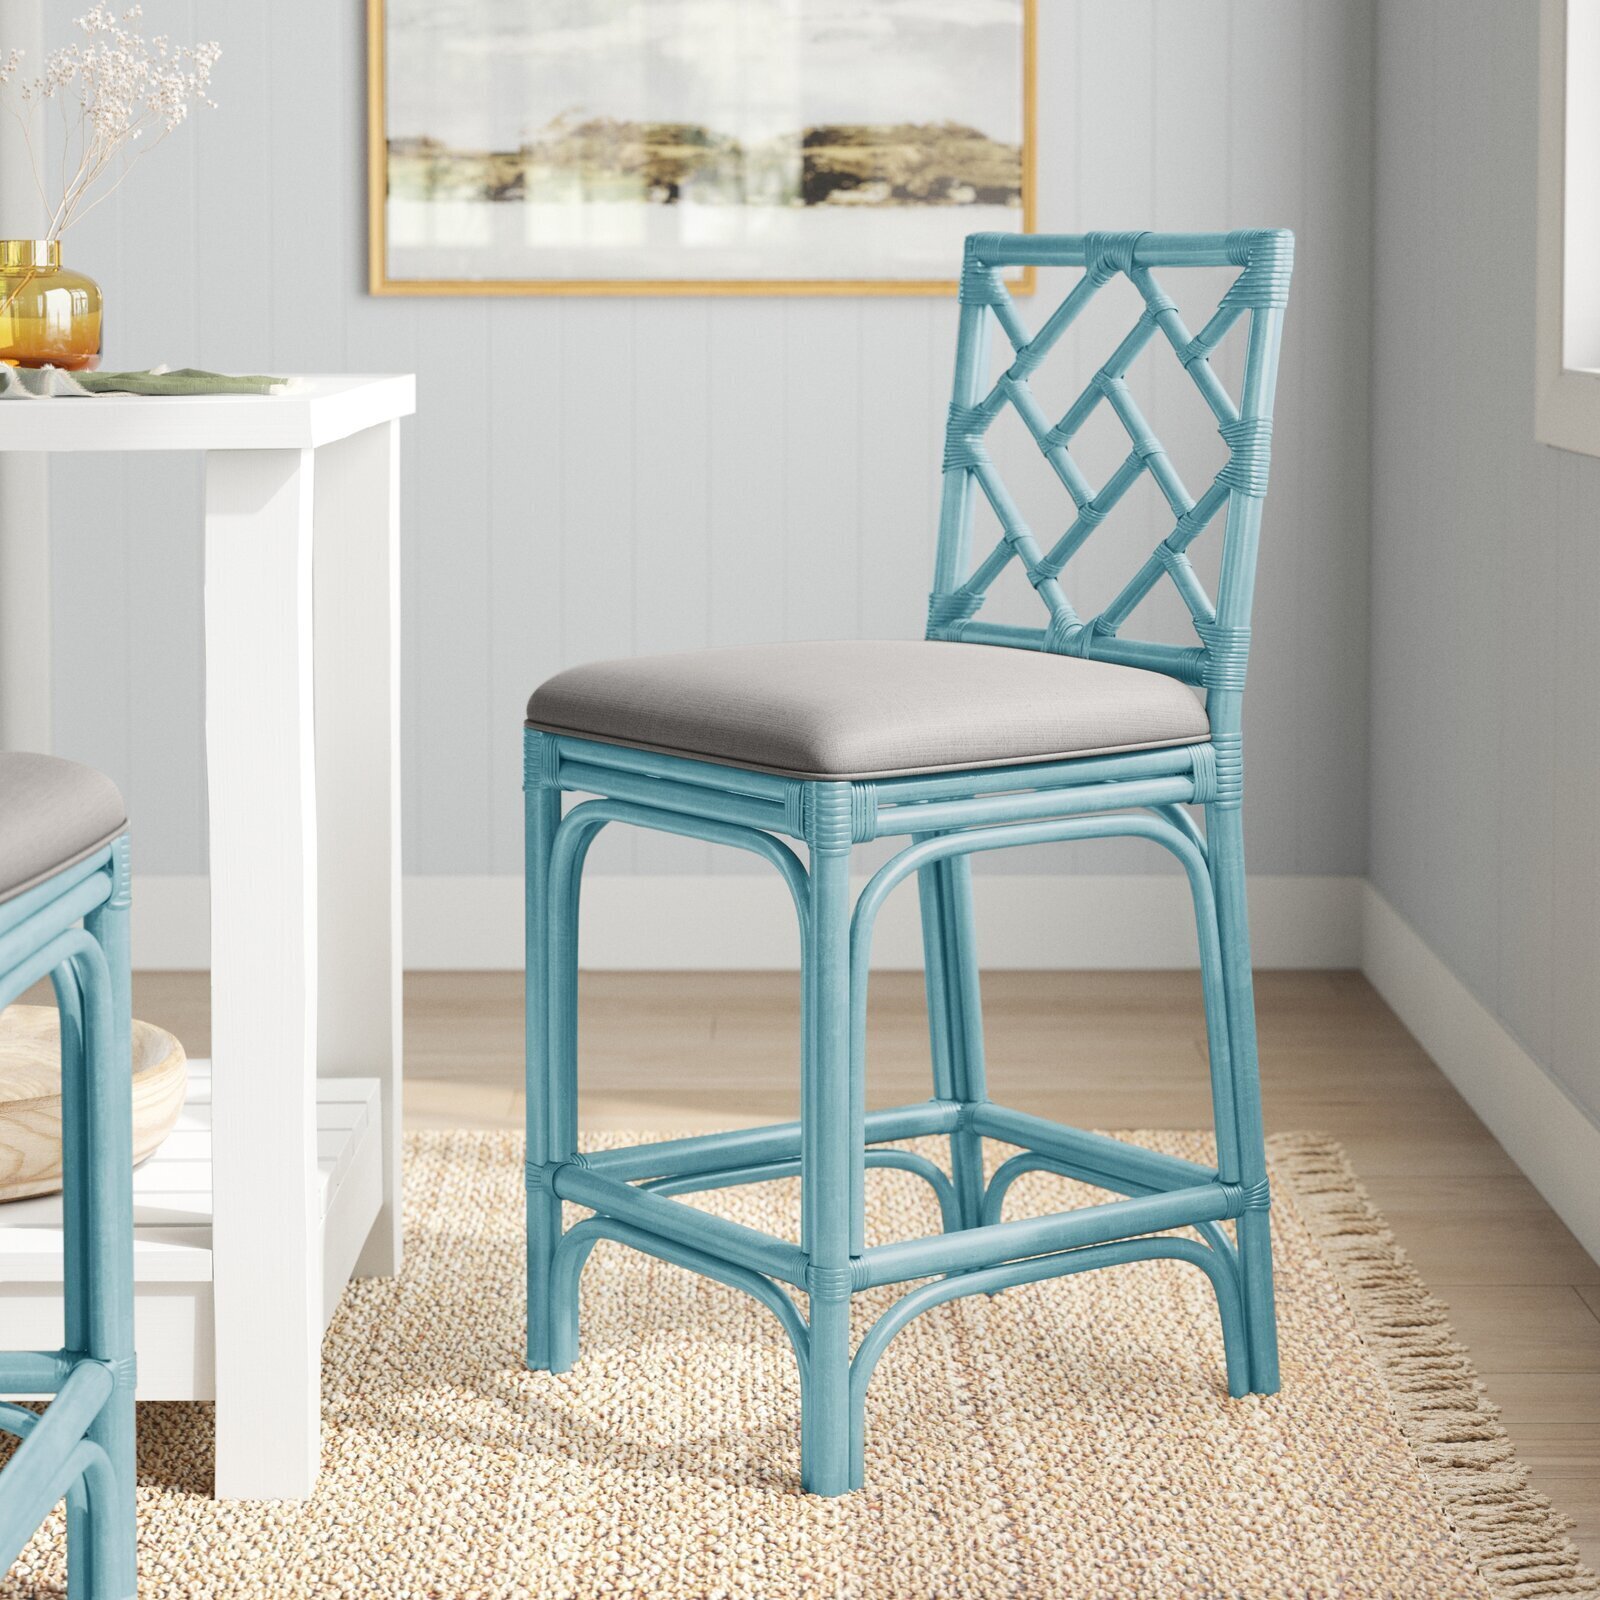 Tropical bar stool in turquoise